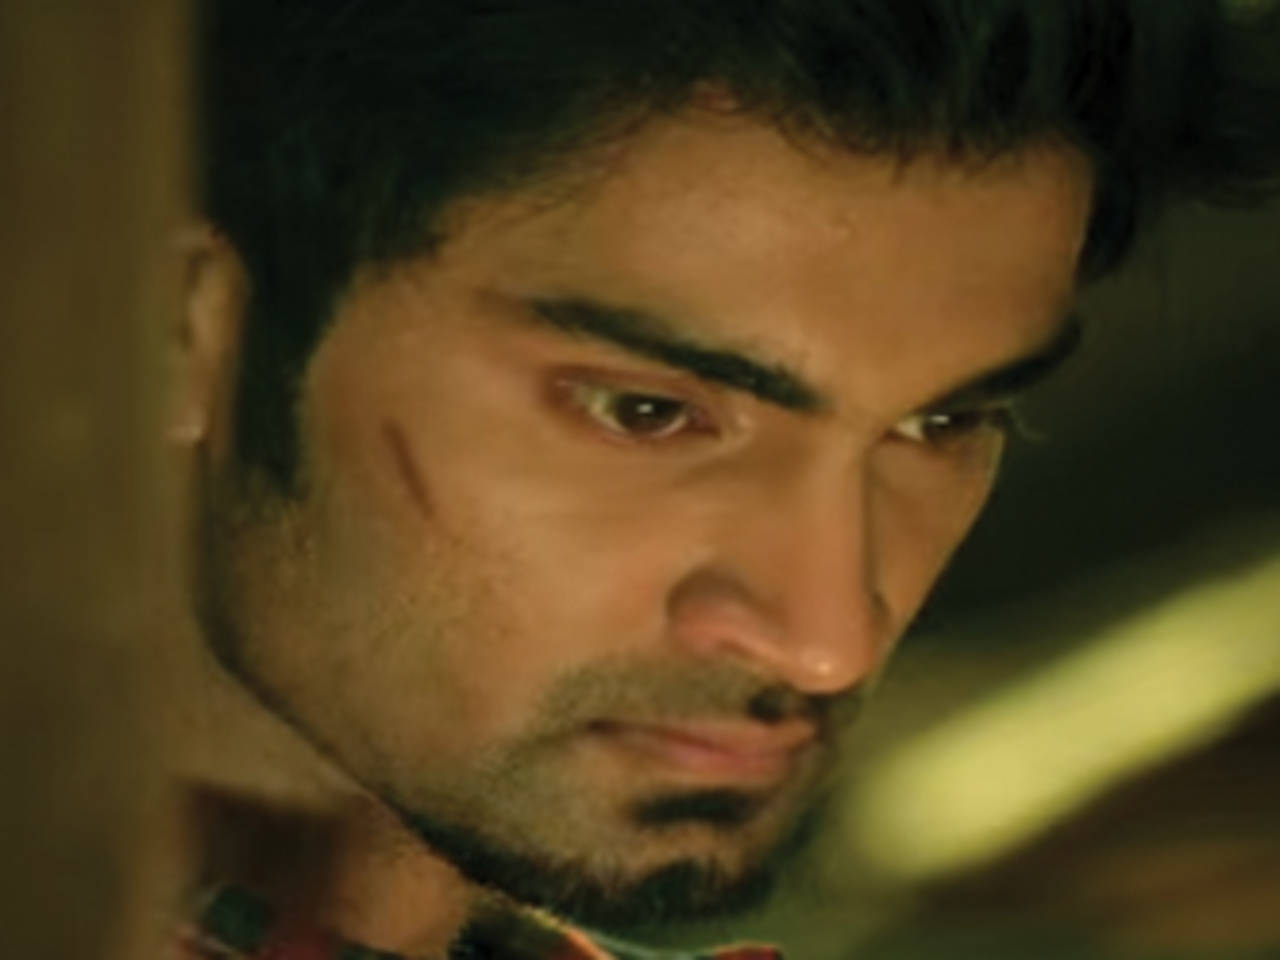 Watch #Atharvaa's action thriller #Kanithan from our Simply Special  catalog! Stream now: http://bit.ly/KanithanOnSS V Creations Atharvaa  Murali... | By Simply SouthFacebook